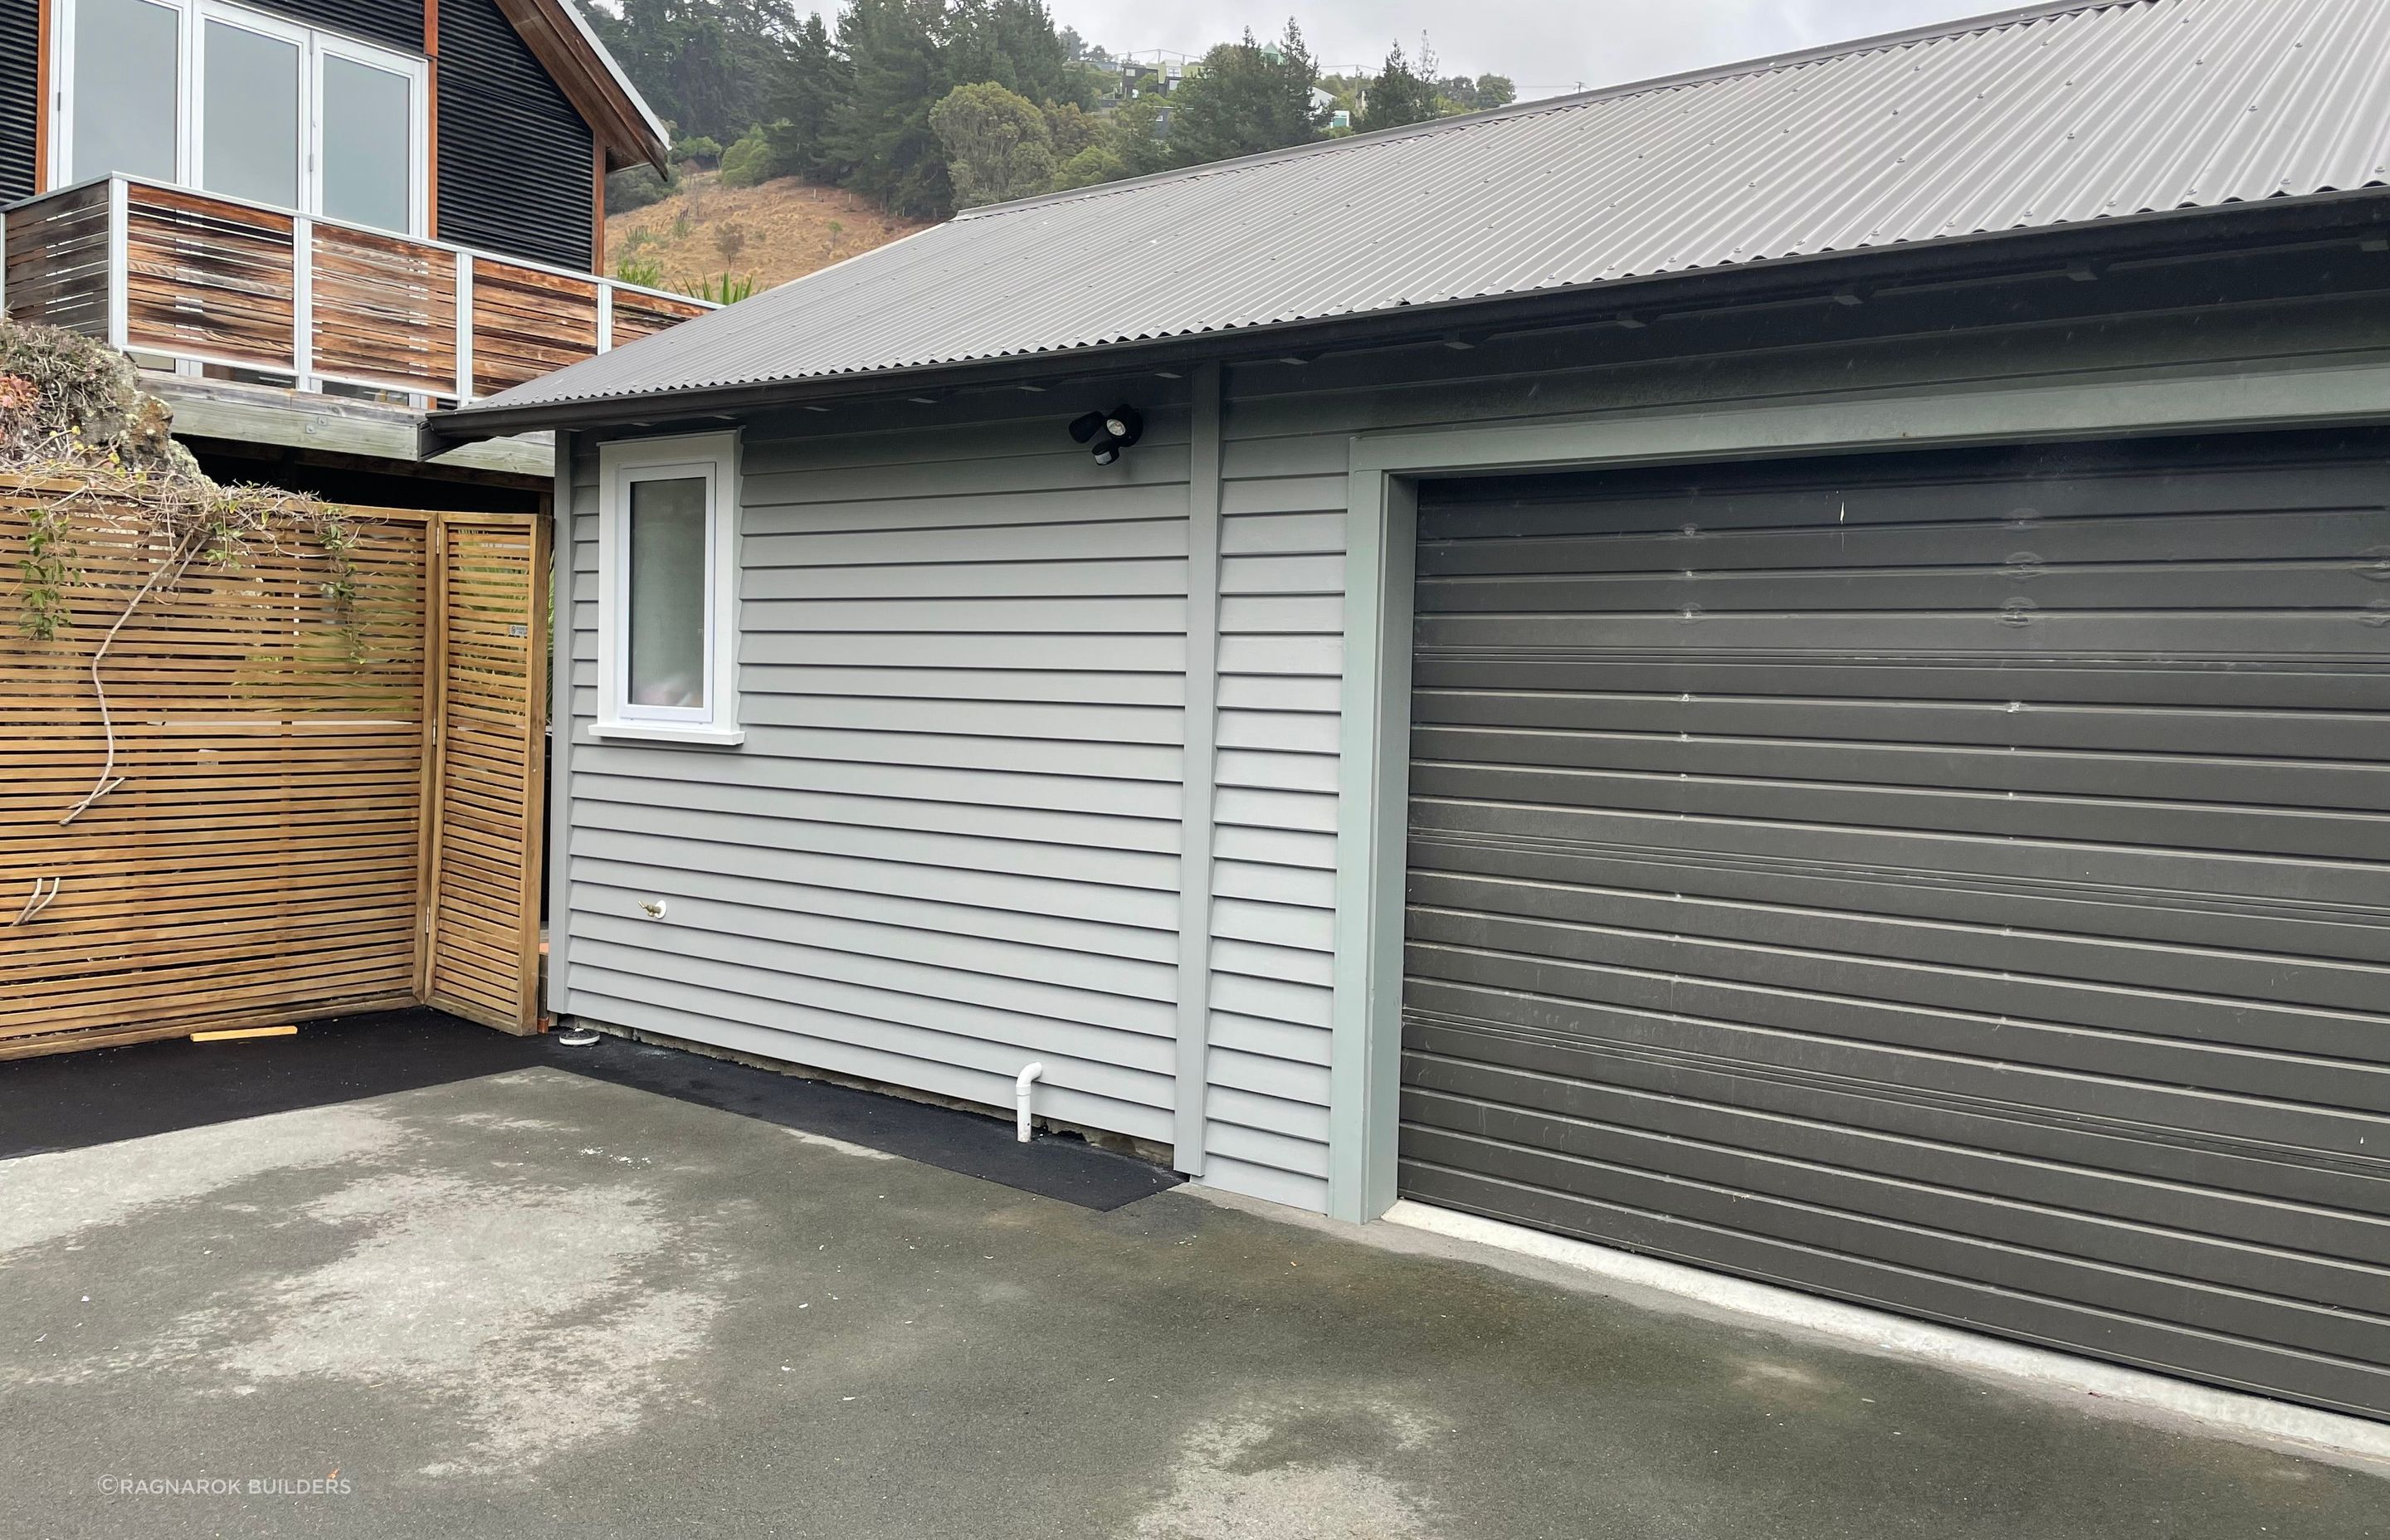 Timber weatherboards to match existing.